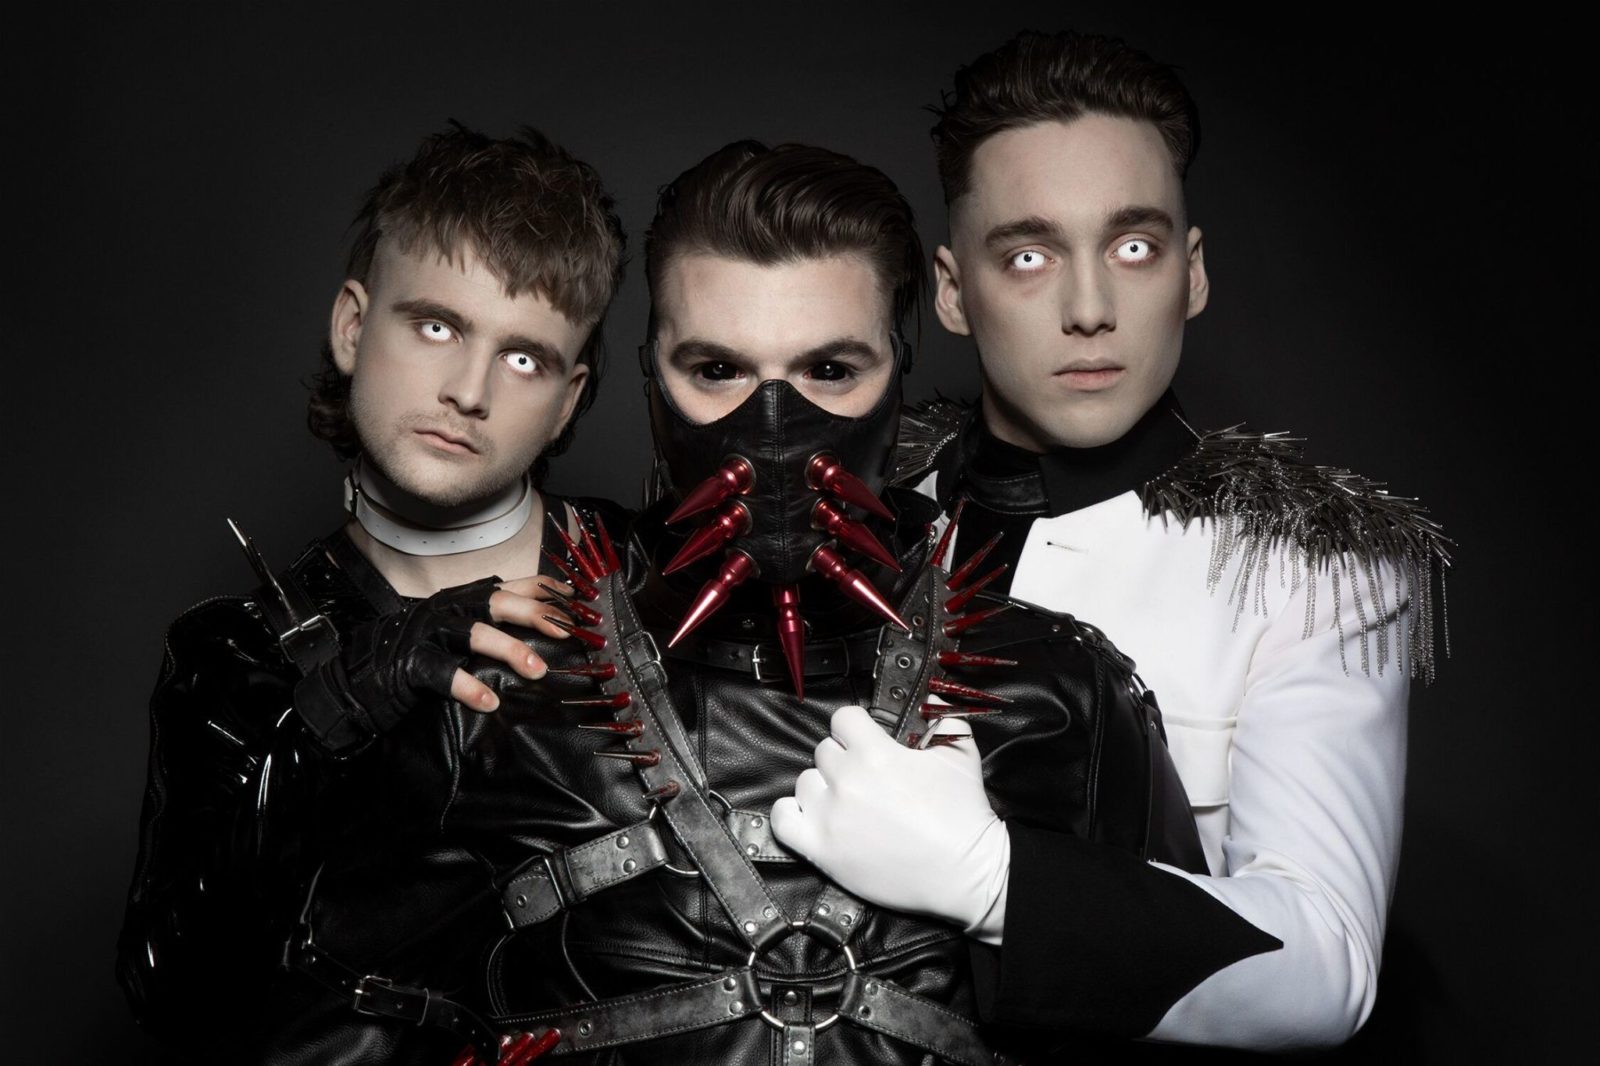 Icelandic techno band Hatari from Iceland plays in Eurovision song contest.